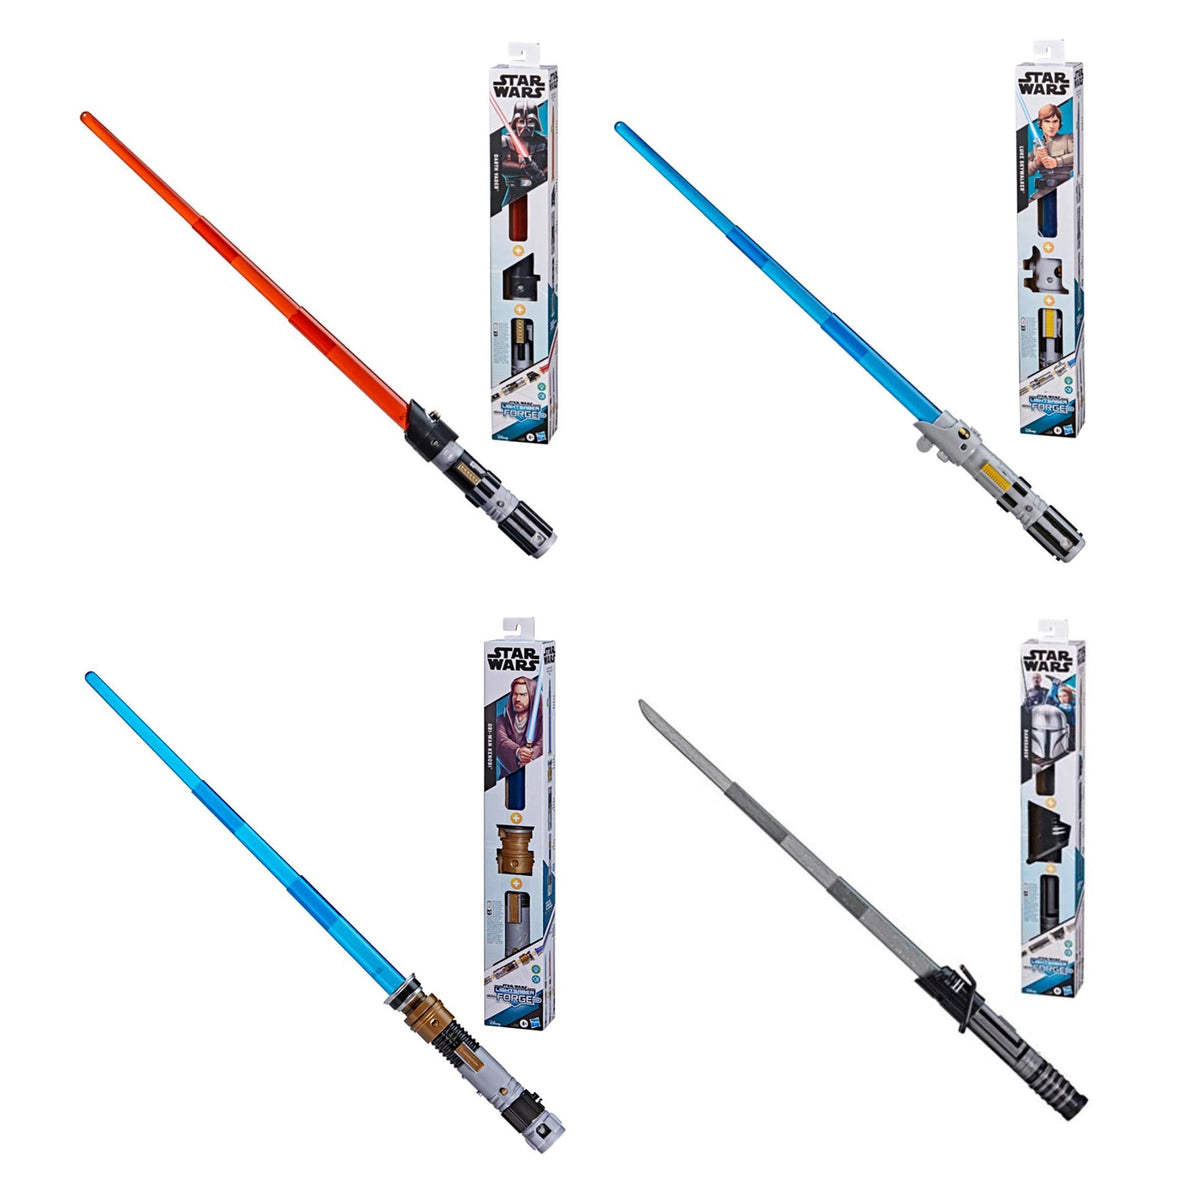 HASBRO Toys & Games Star Wars Electronic Lightsaber Forge, Assortment, 1 Count